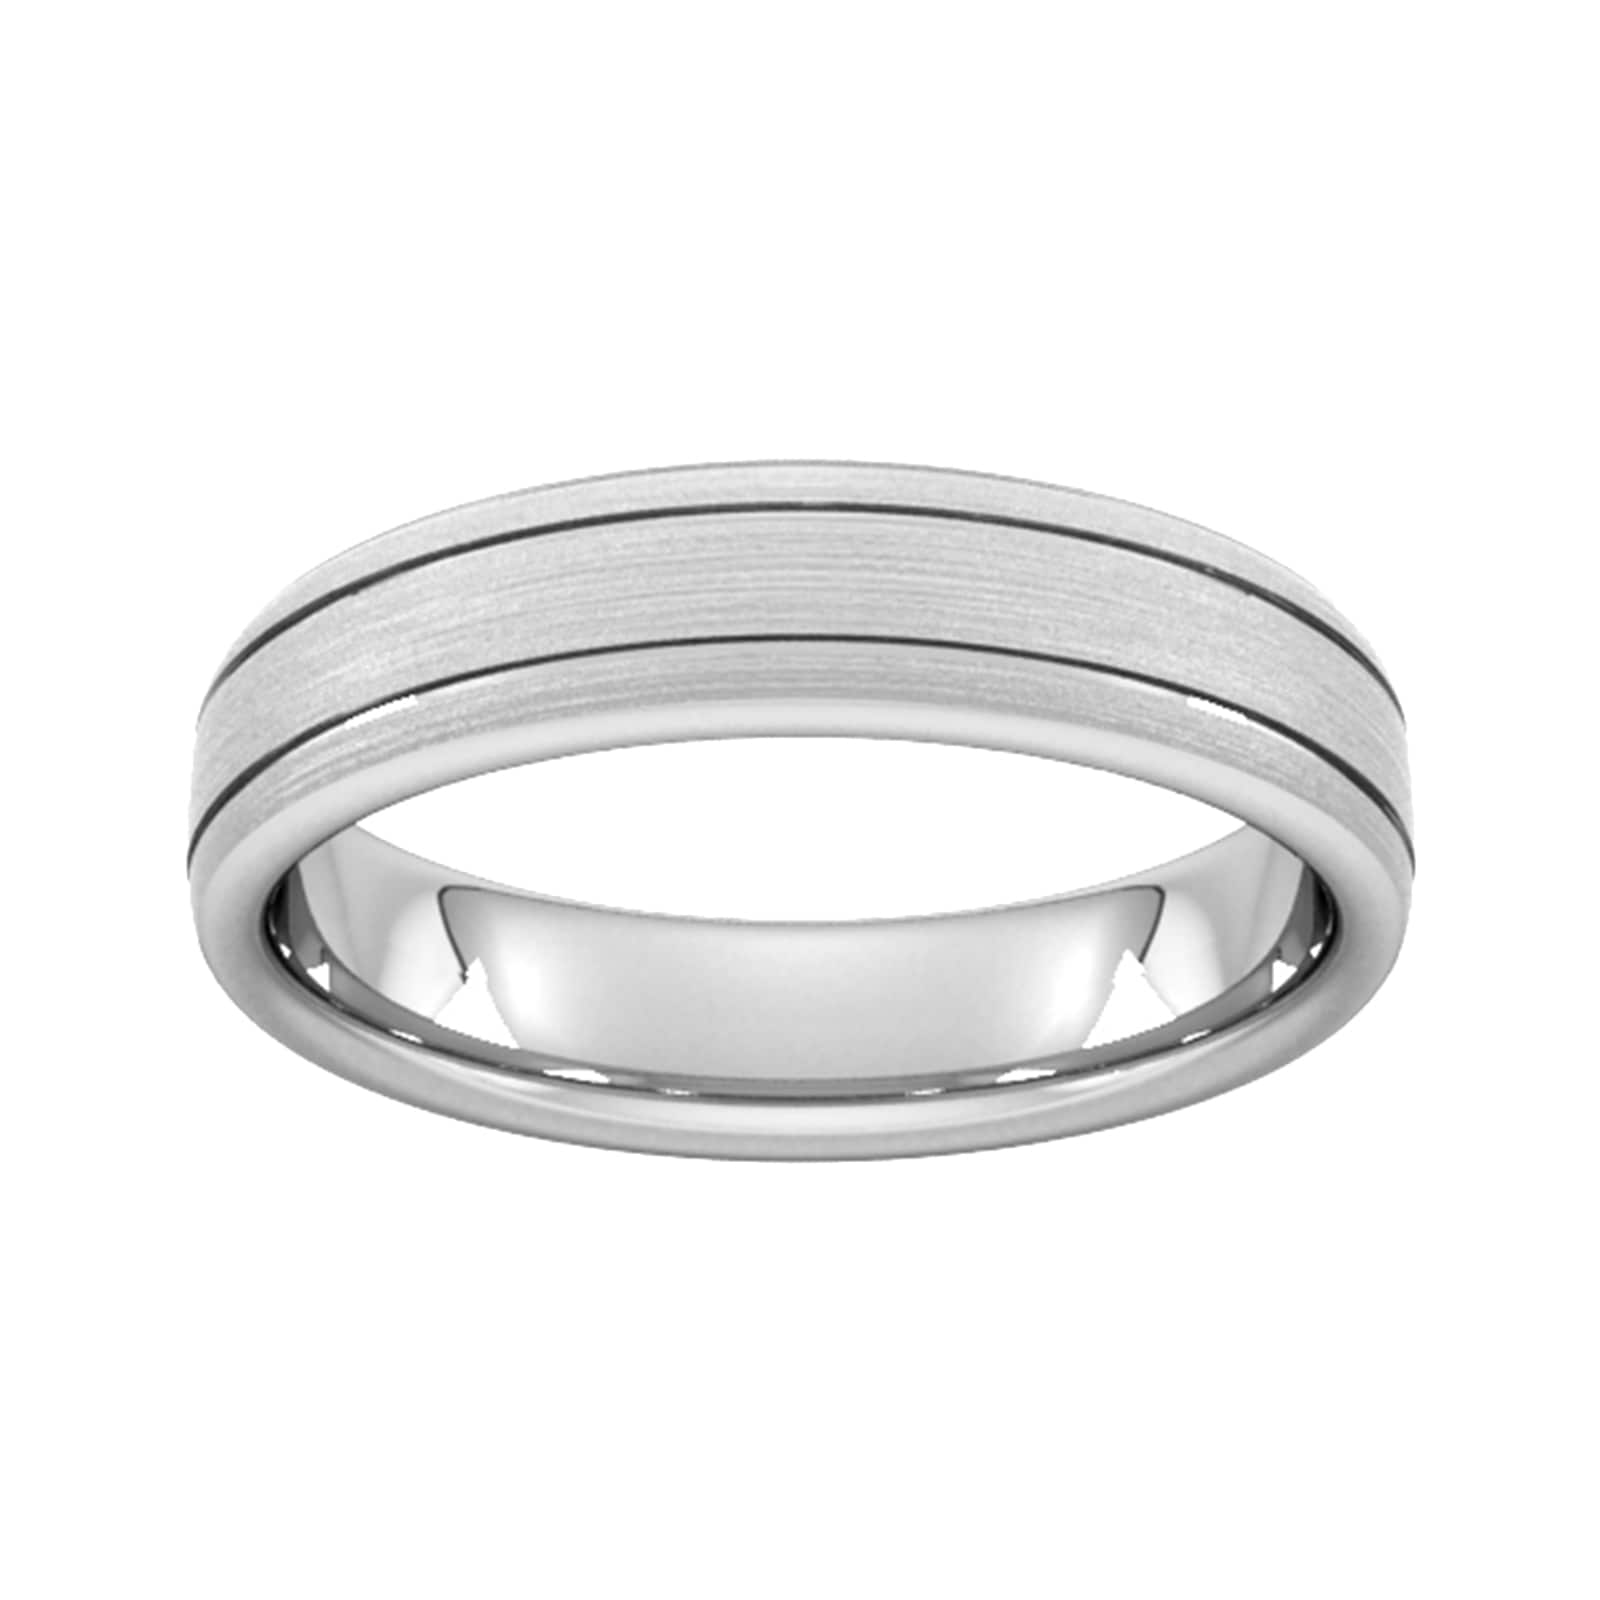 5mm Flat Court Heavy Matt Finish With Double Grooves Wedding Ring In 950 Palladium - Ring Size P